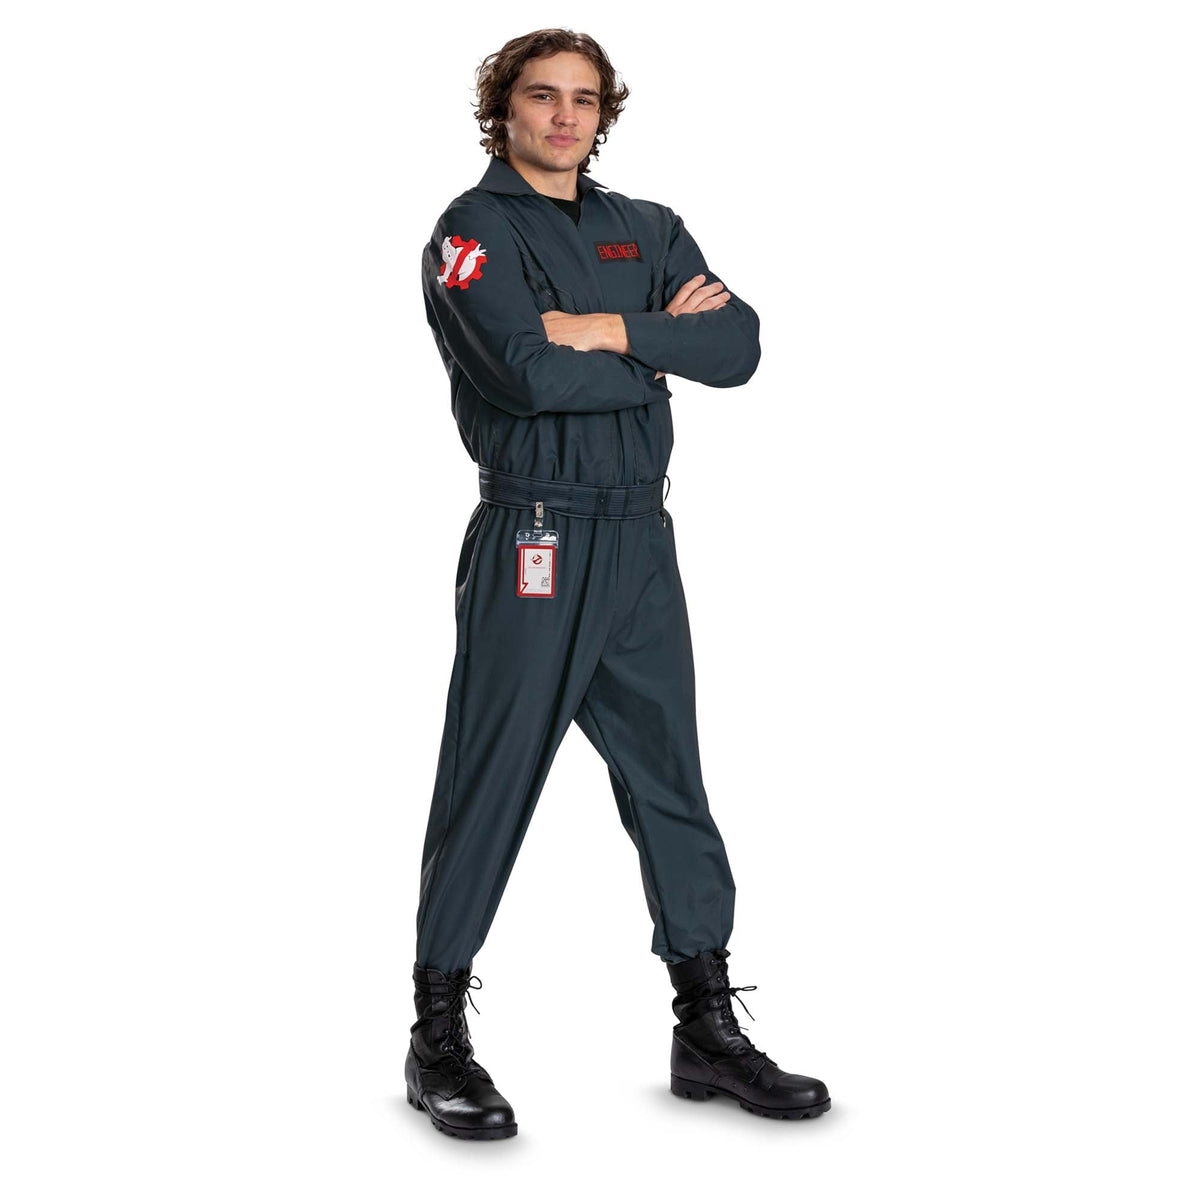 DISGUISE (TOY-SPORT) Costumes Ghostbusters: Frozen Empire Engineering Classic Costume for Adults, Black Jumpsuit